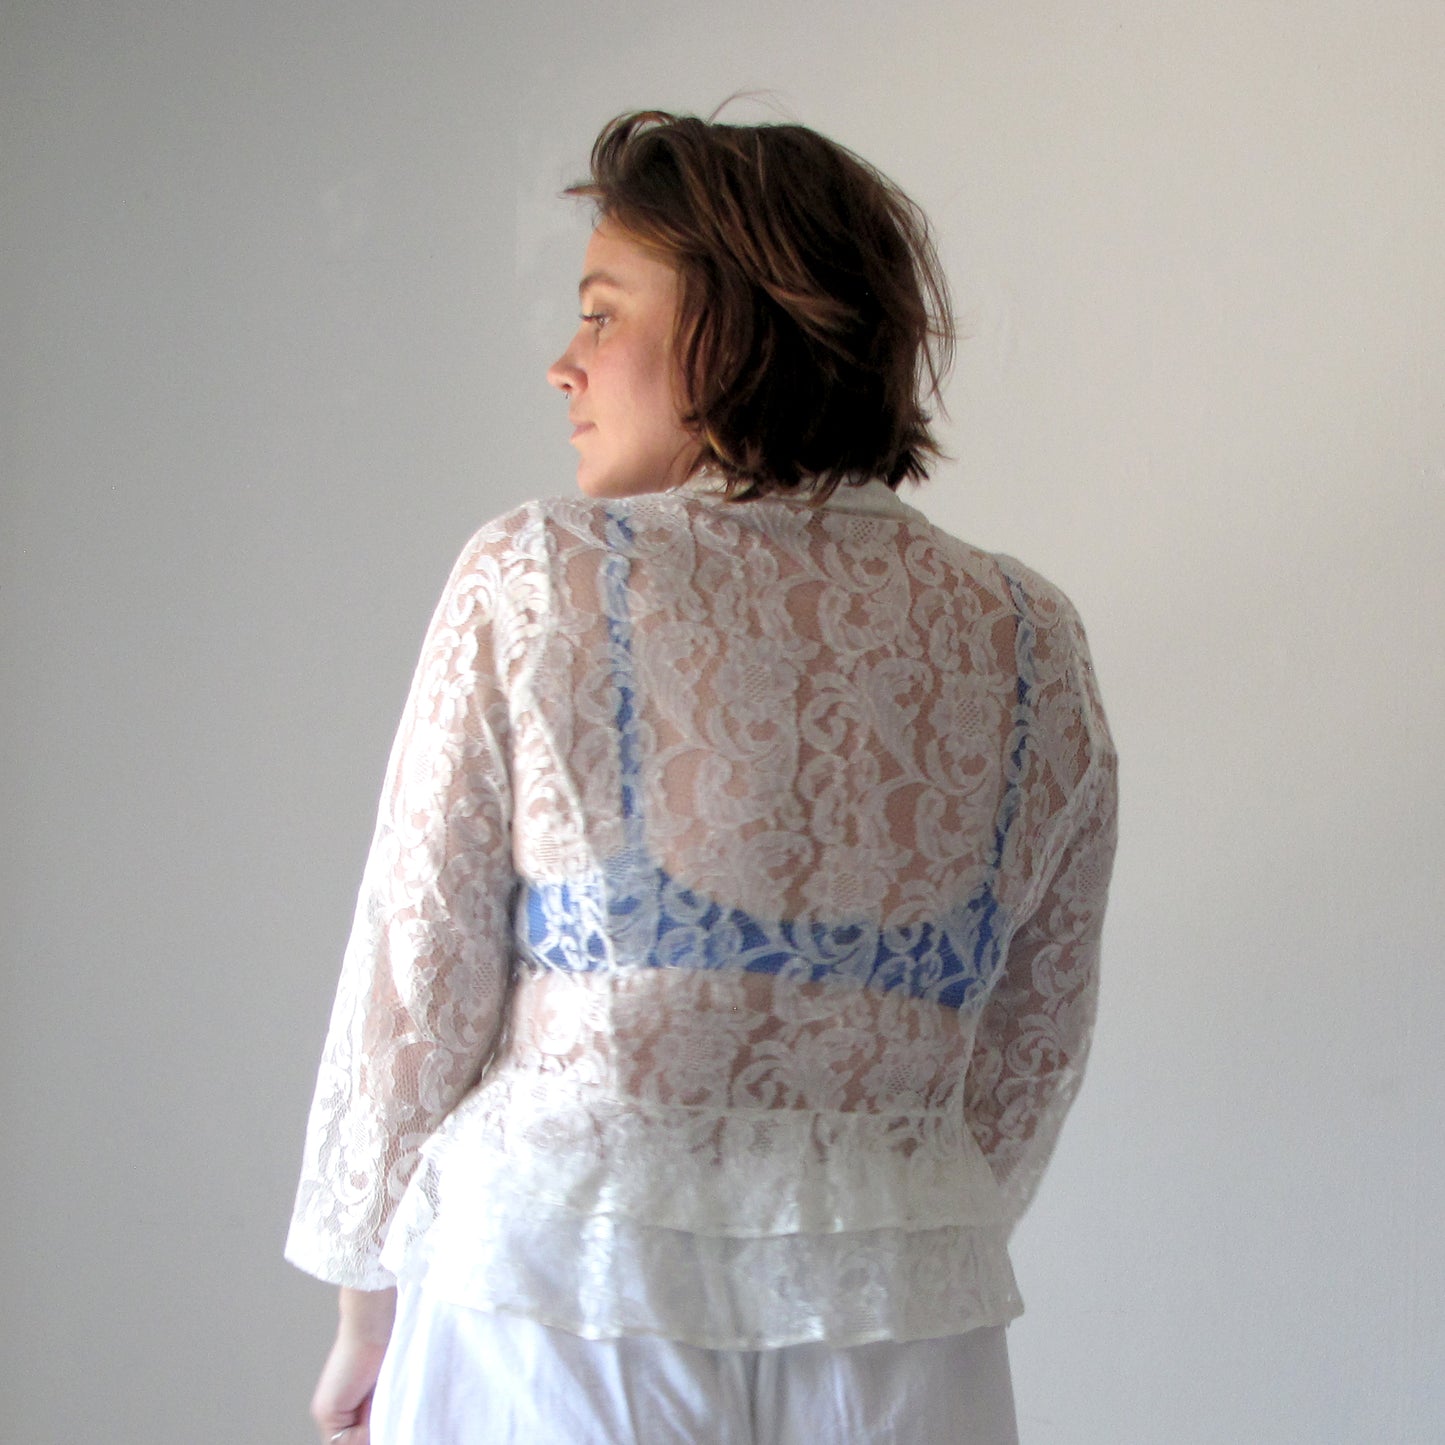 Damask Lace Top